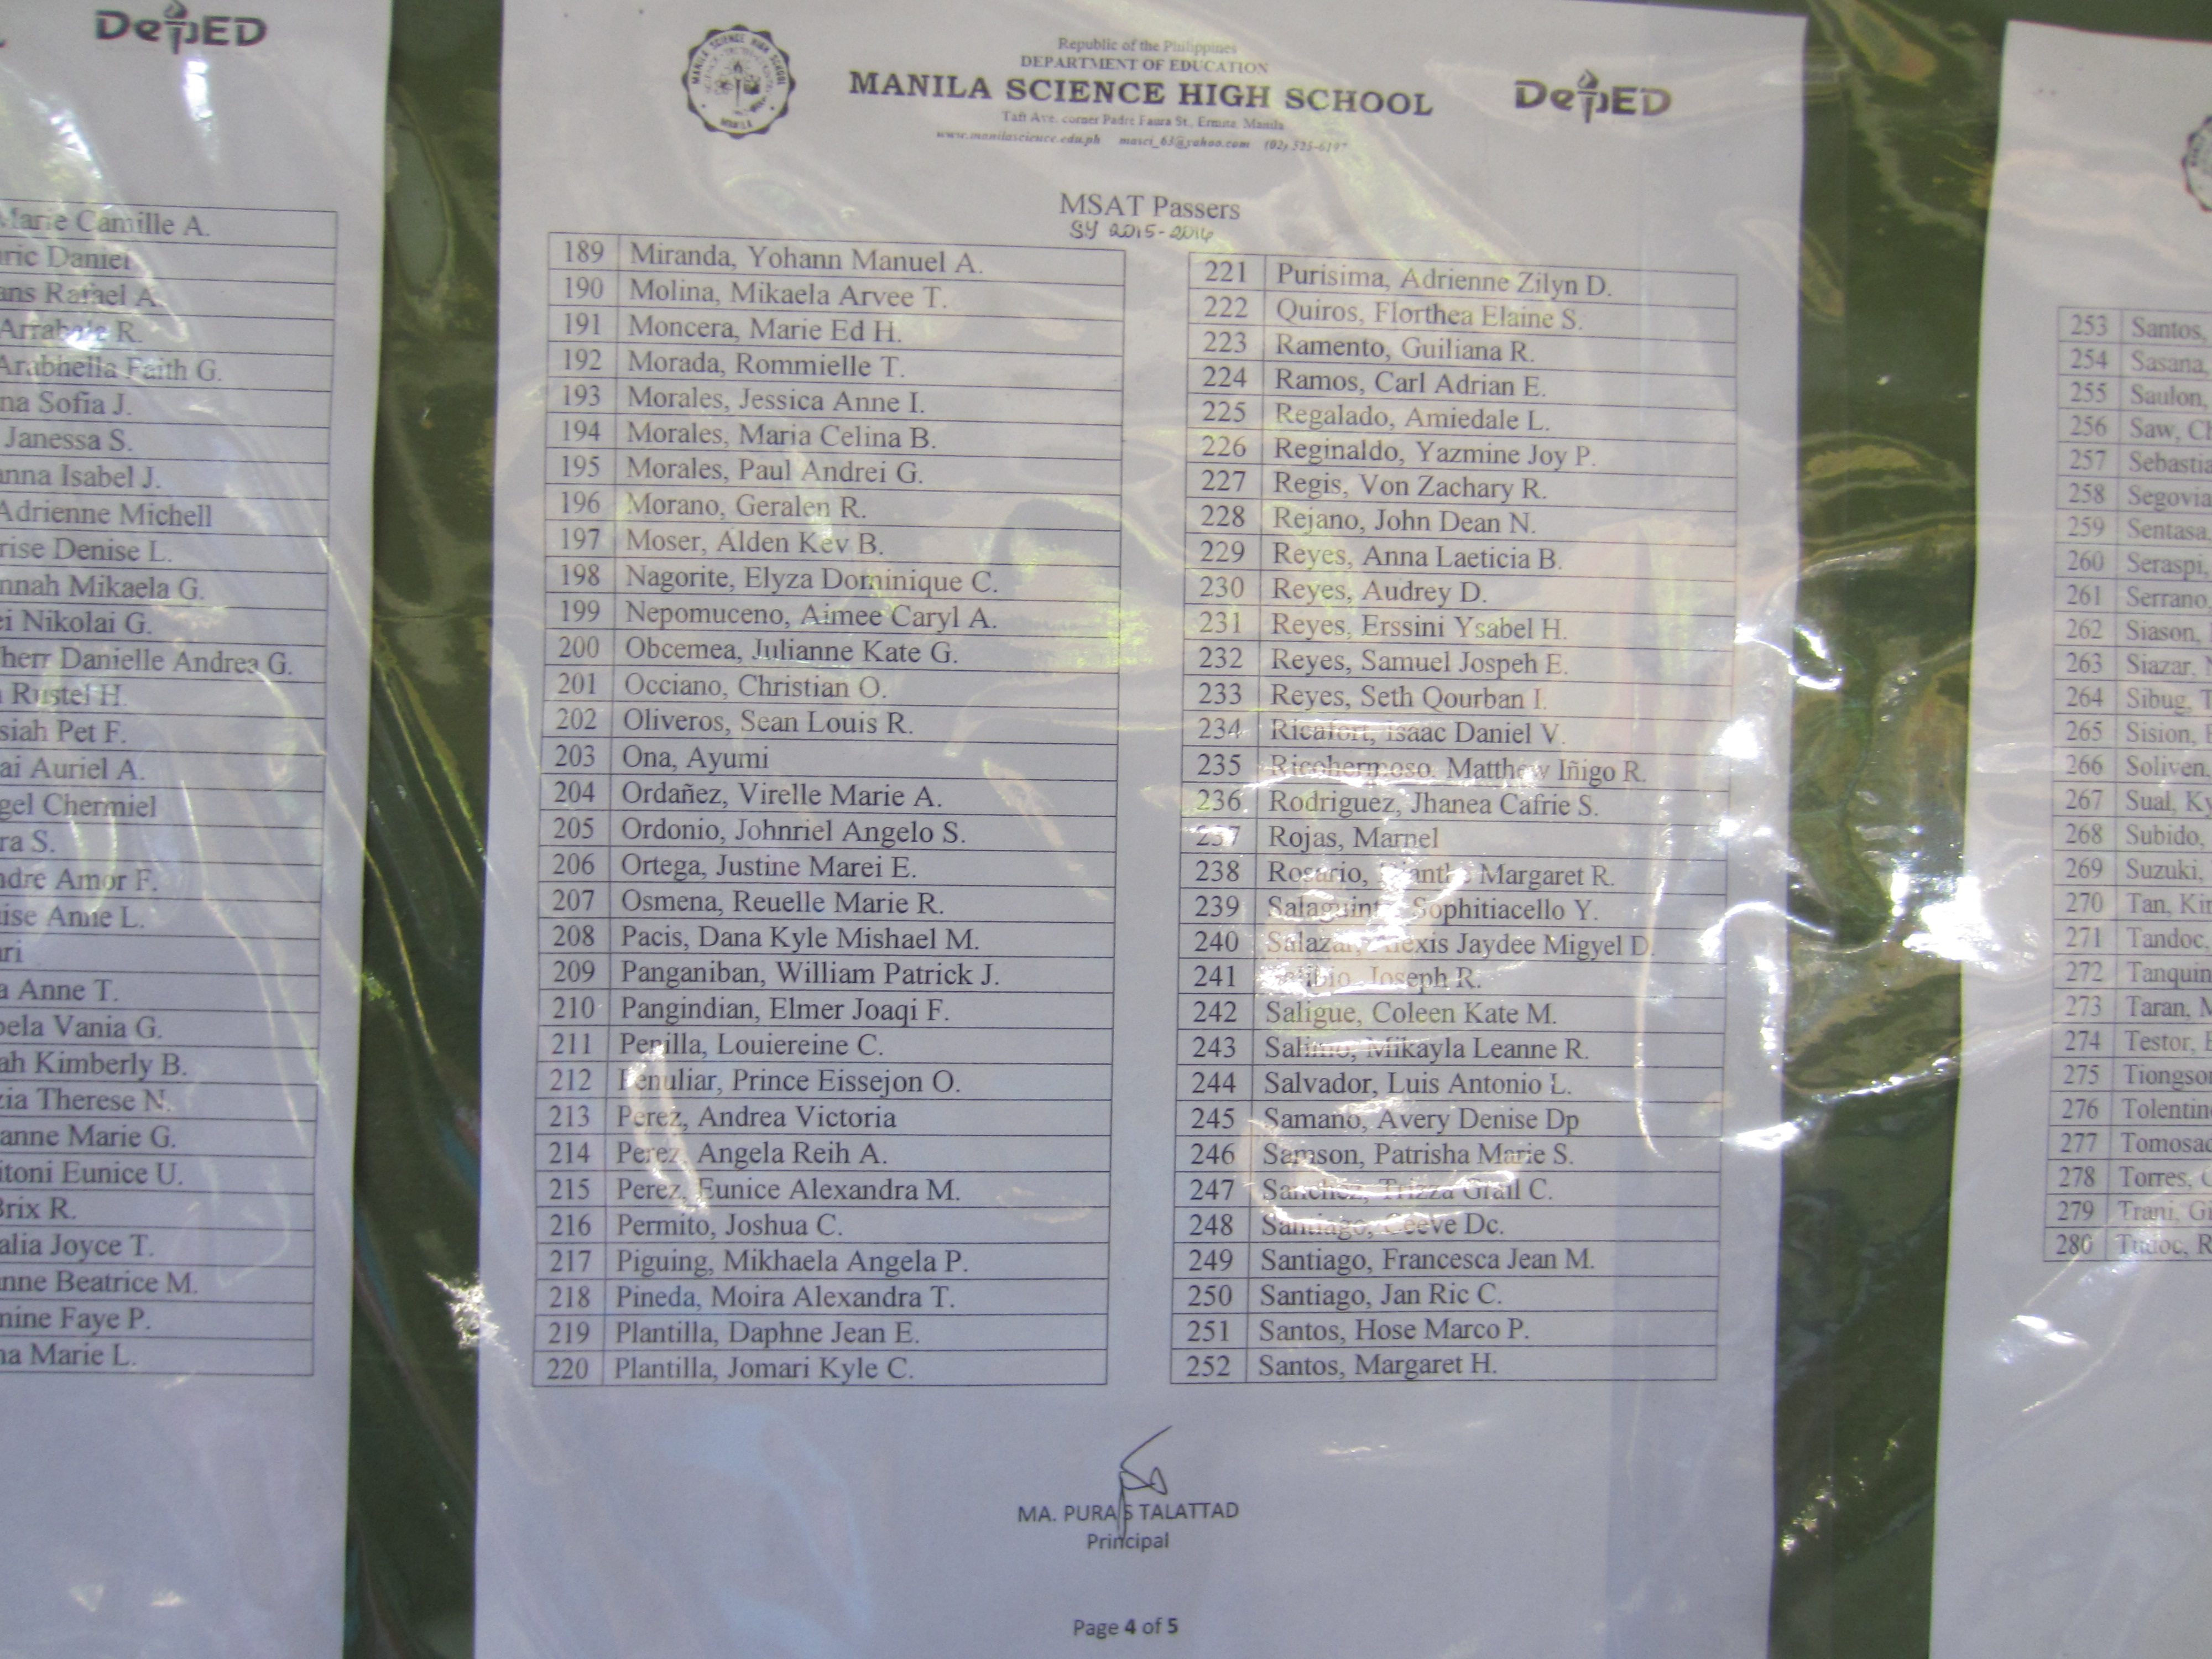 Manila Science High School Admission Test 2015 results